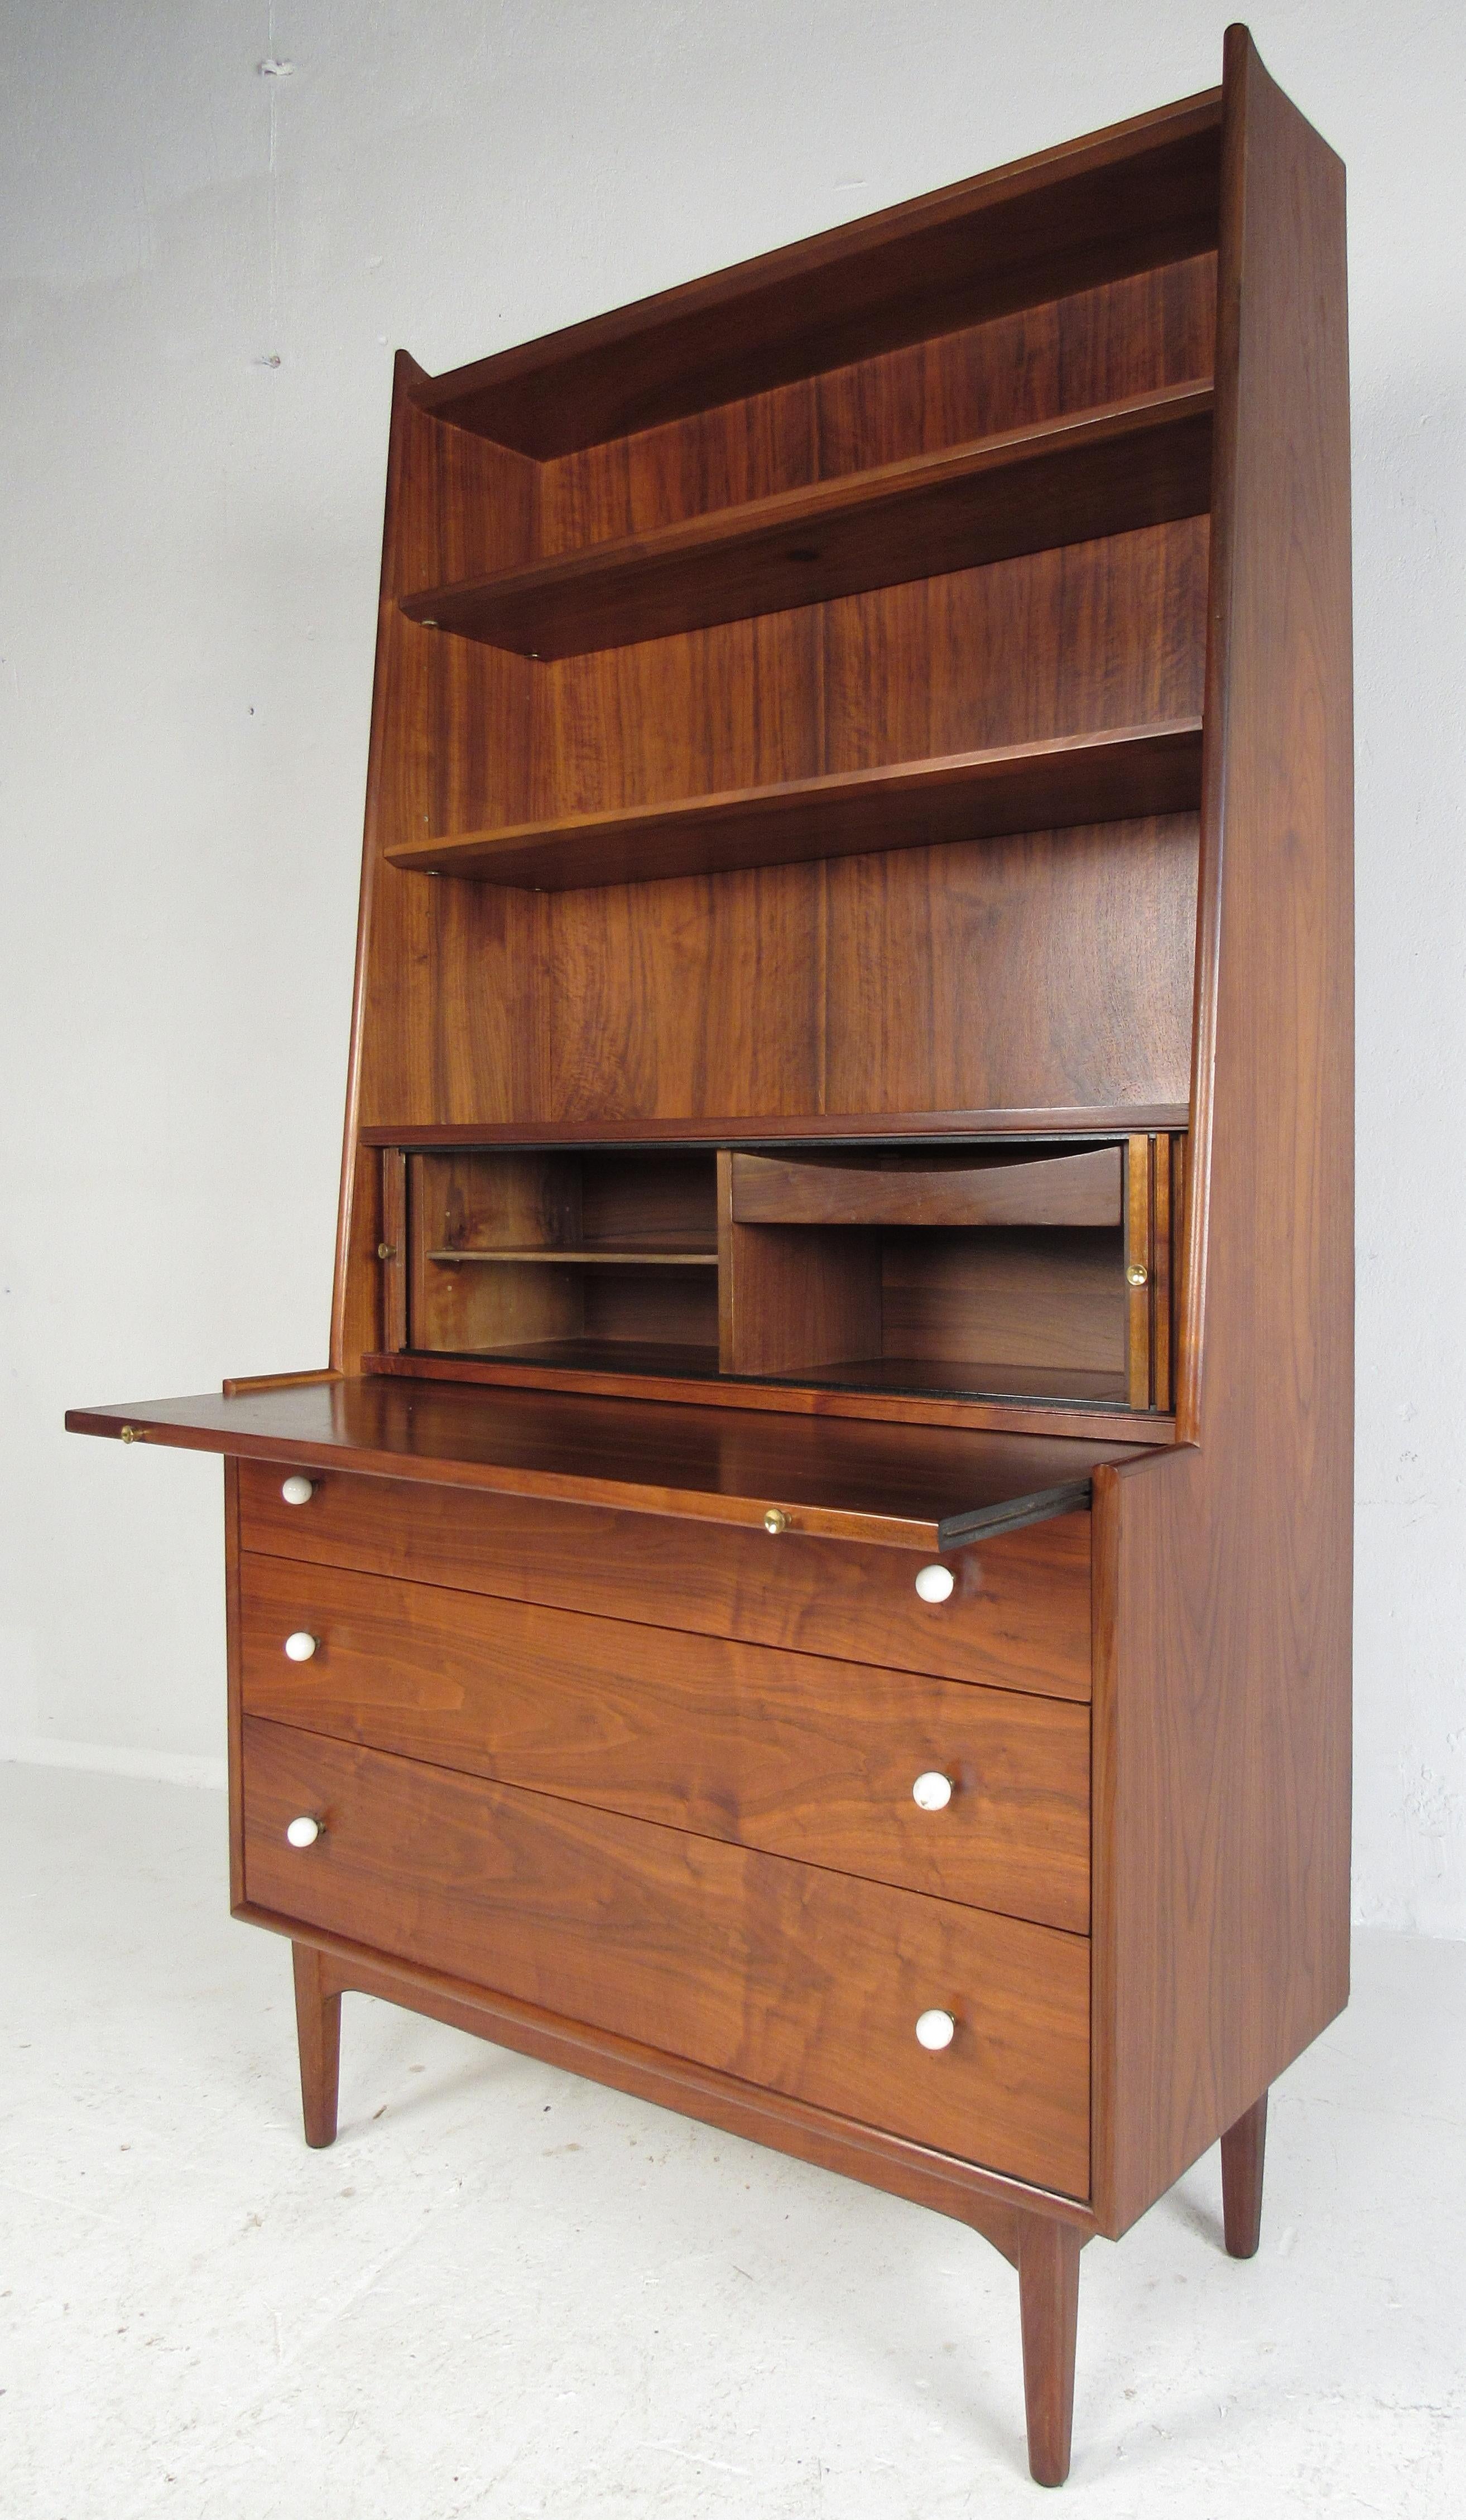 Attractive secretary designed by Kip Stewart featuring two adjustable shelves on top, tambour door storage compartment, three storage drawers below and a pull-out writing surface. The deep rich walnut wood grain contrasts nicely with the white